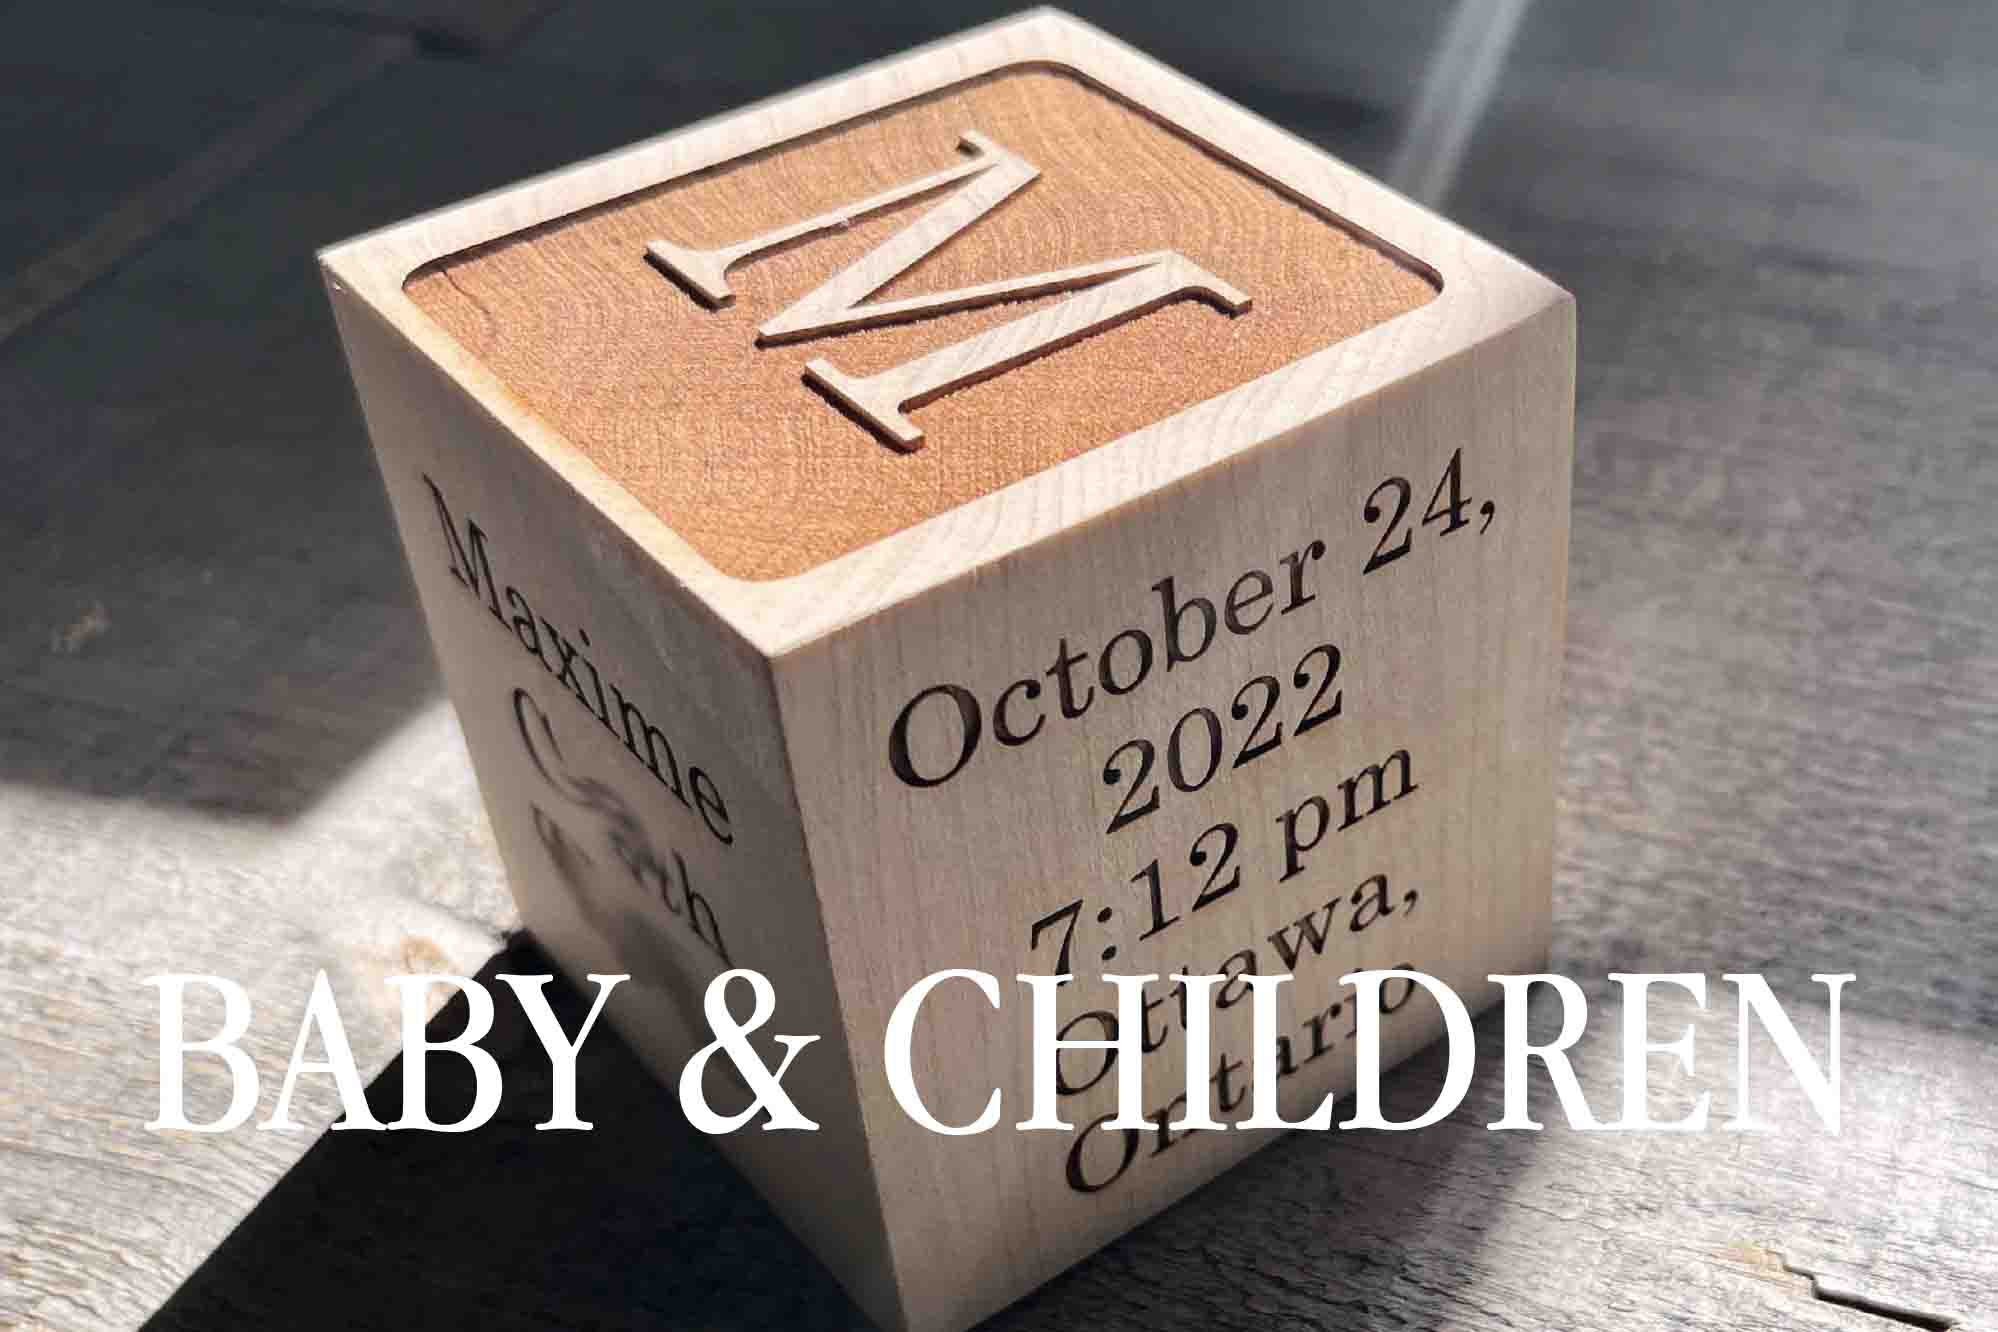 cUSTOM ENGRAVED BABY GIFTS